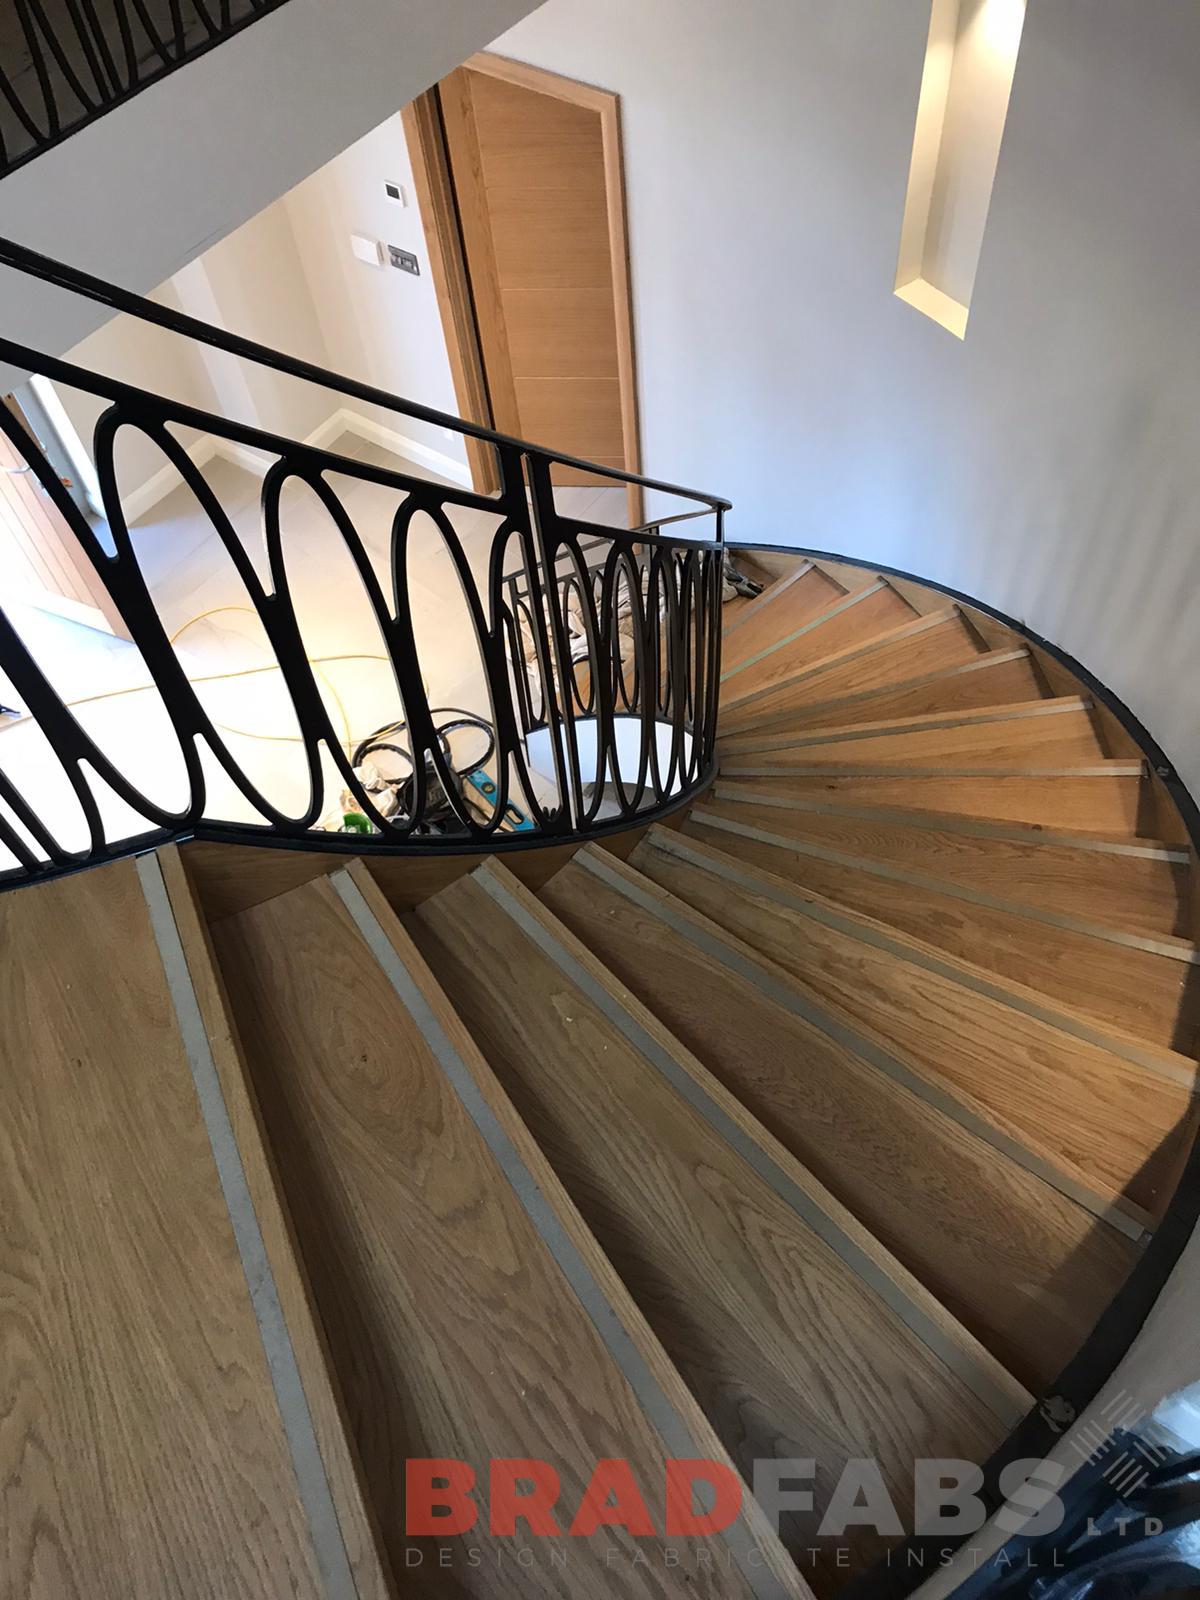 Bradfabs helical internal staircase for a domestic property with oak treads and feature stainless steel insert, with veneer stringer by Bradfabs 